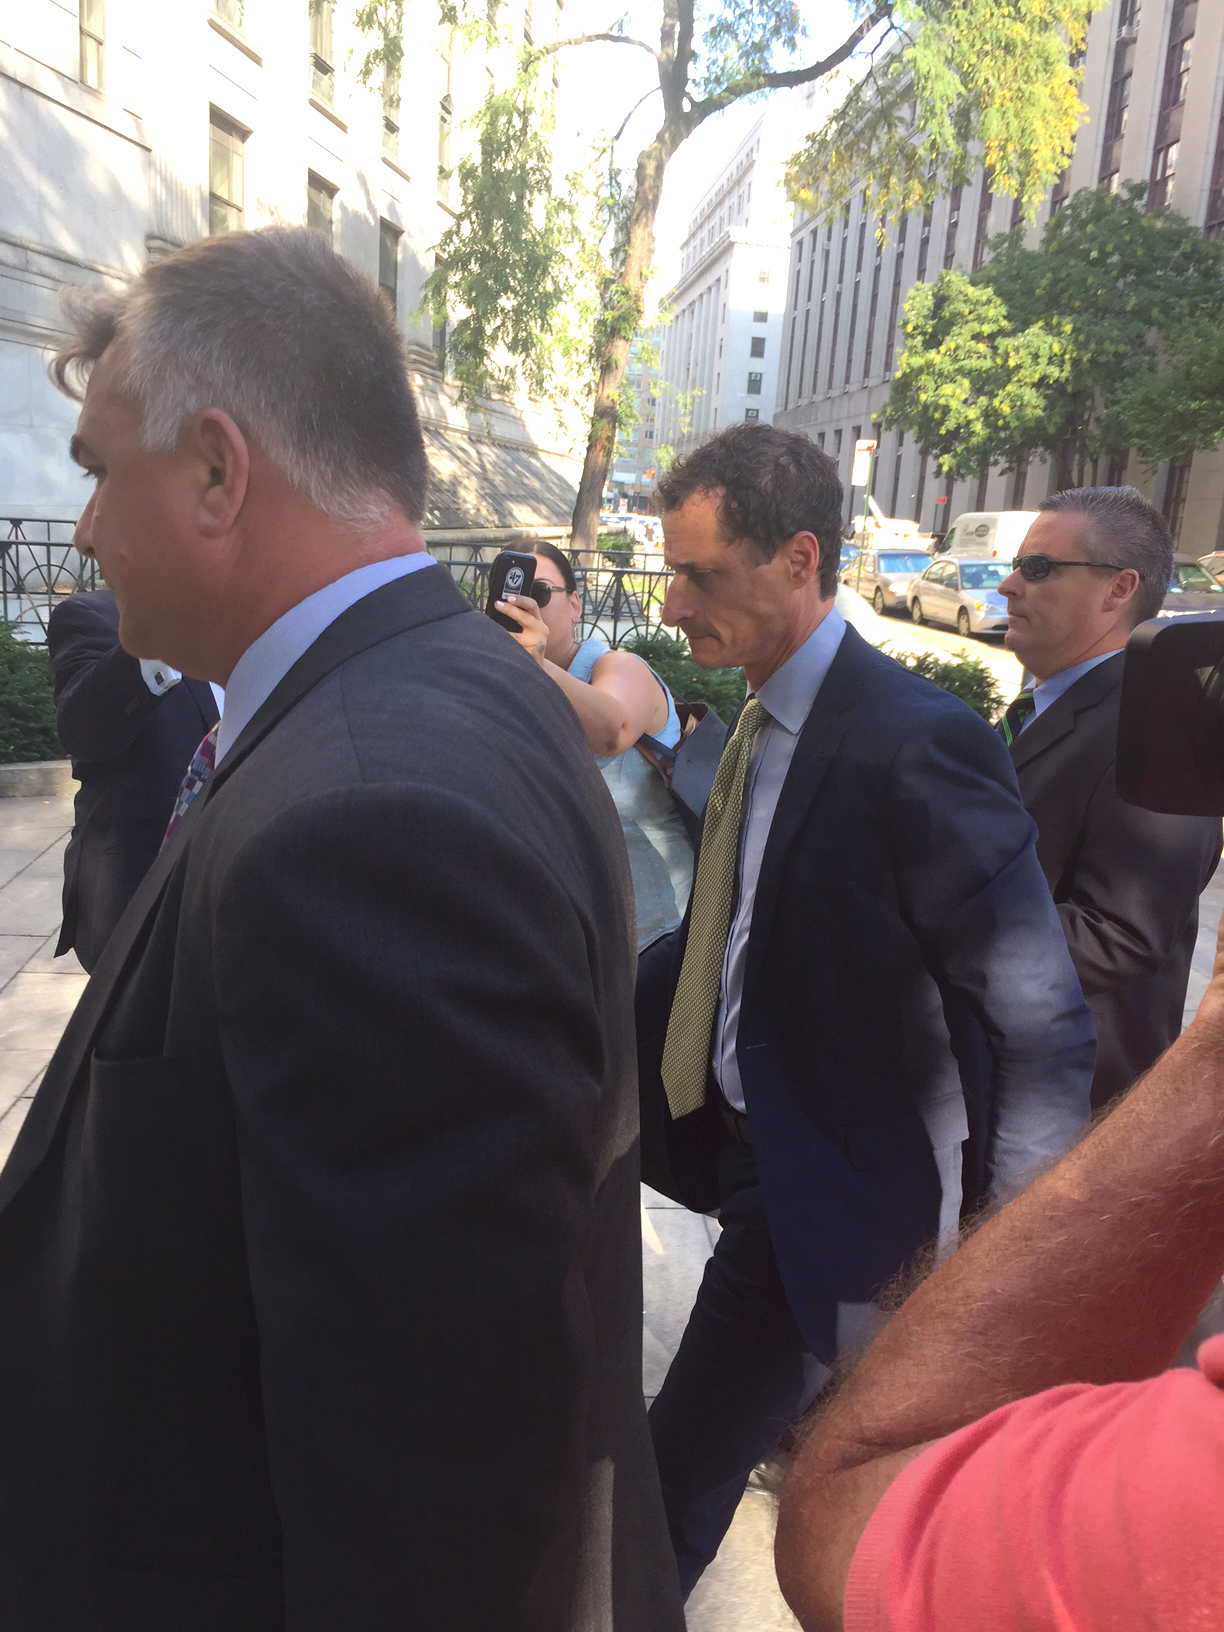 PHOTO: Anthony Weiner heads into court for his sentencing, Sept. 25, 2017.